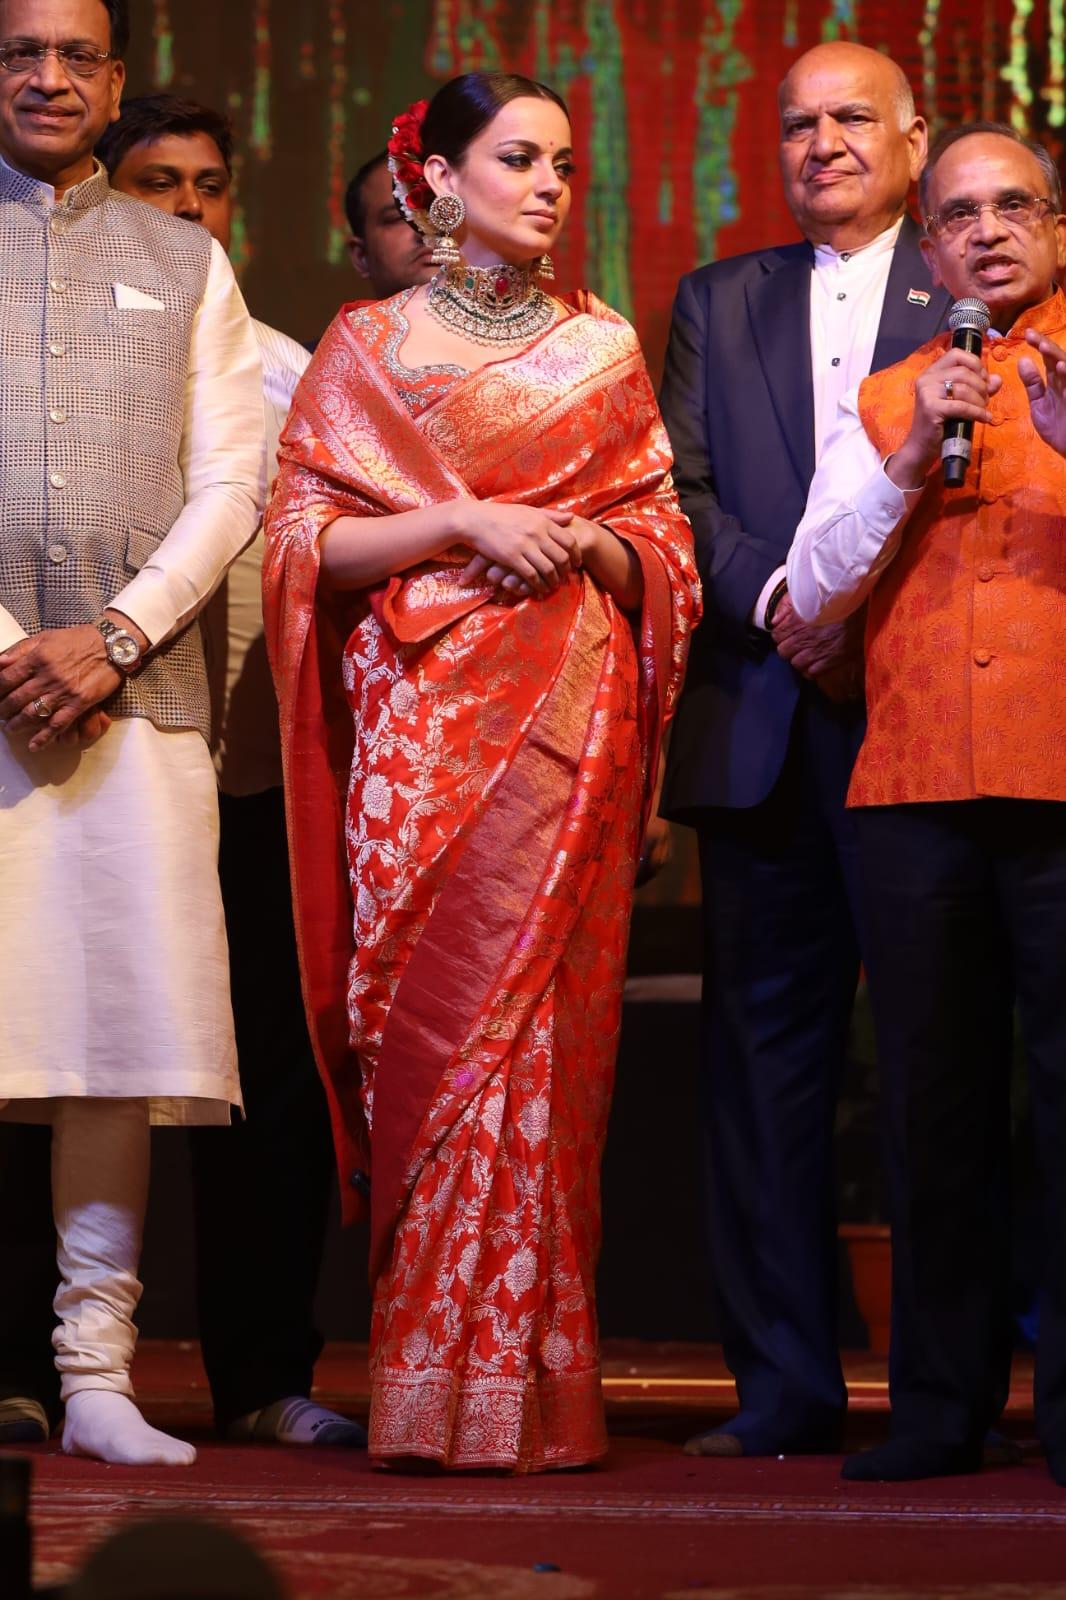 For the occasion, Kangana opted for a red traditional saree